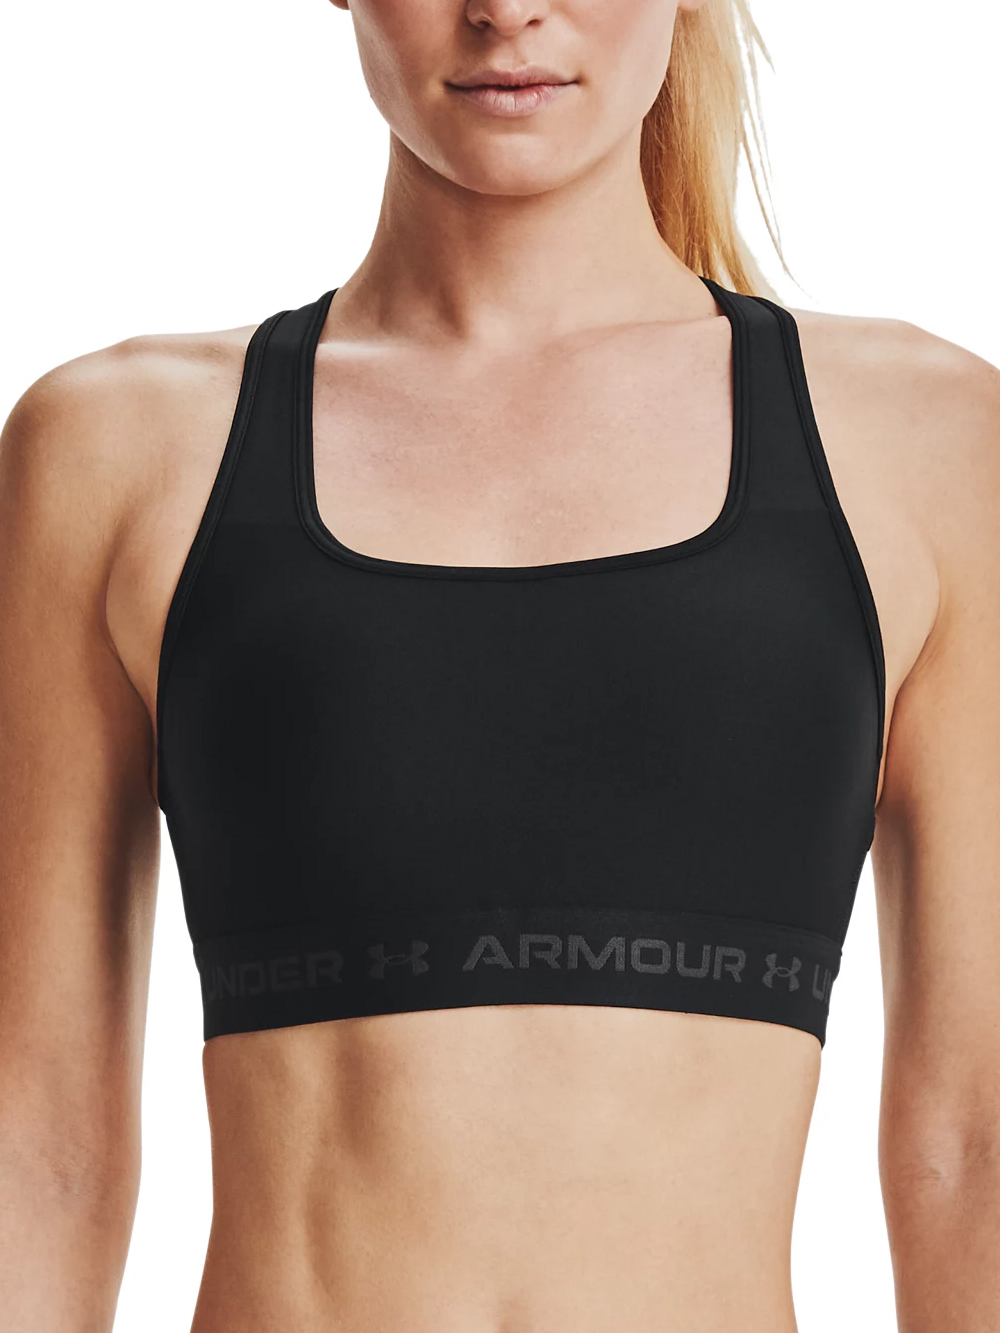 Under Armour Women's armour mid crossback sports bra 1361034